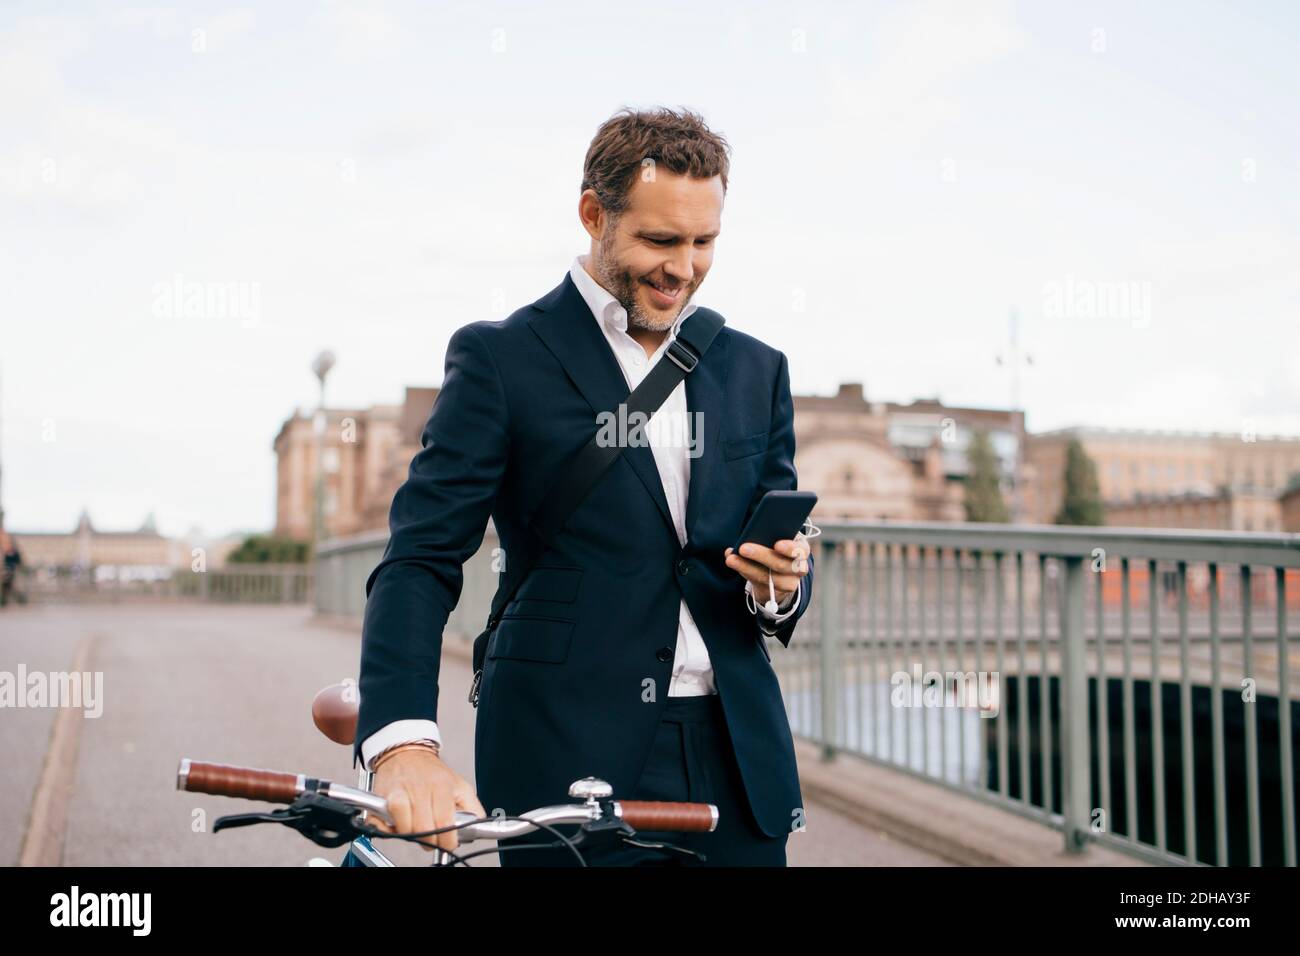 Smiling businessman using mobile phone while walking with bicycle on bridge in city Stock Photo